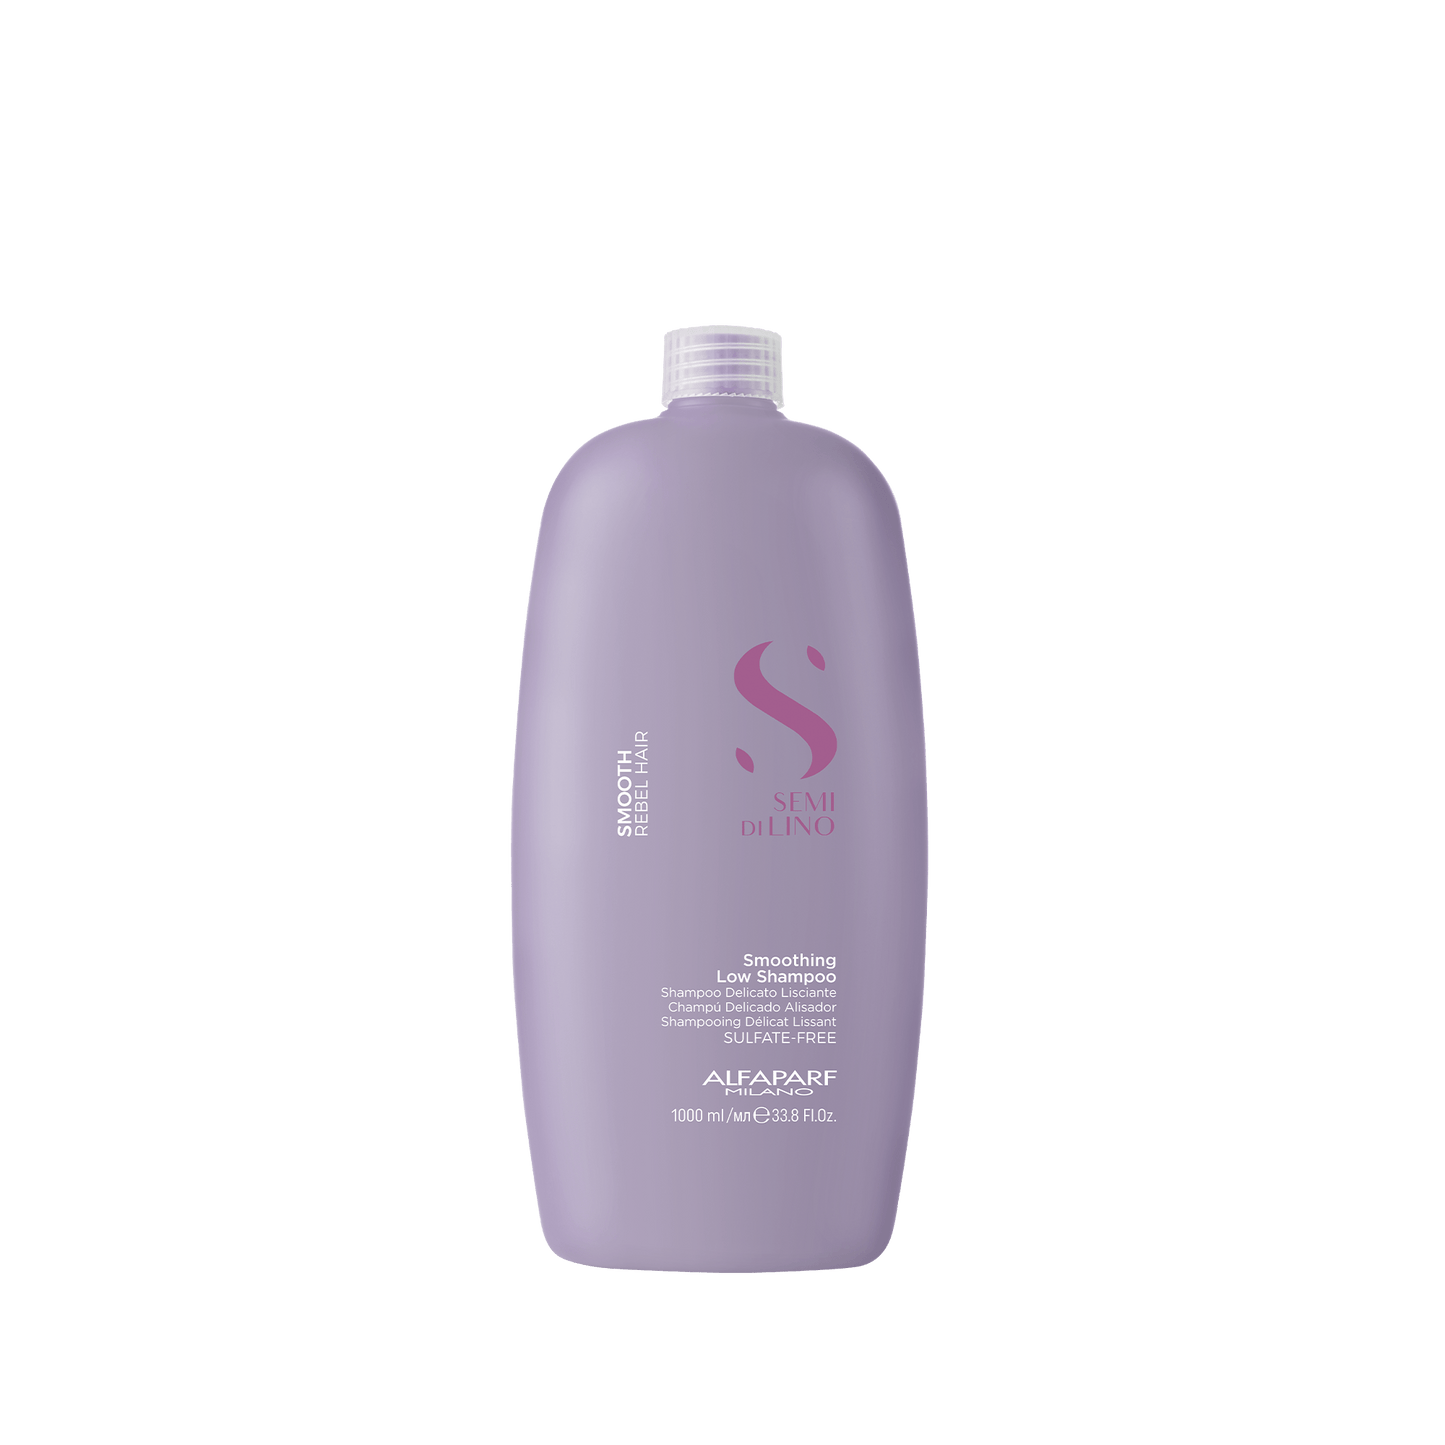 Smoothing Low Shampoo 1 Liter best shampoo and conditioner for frizzy 